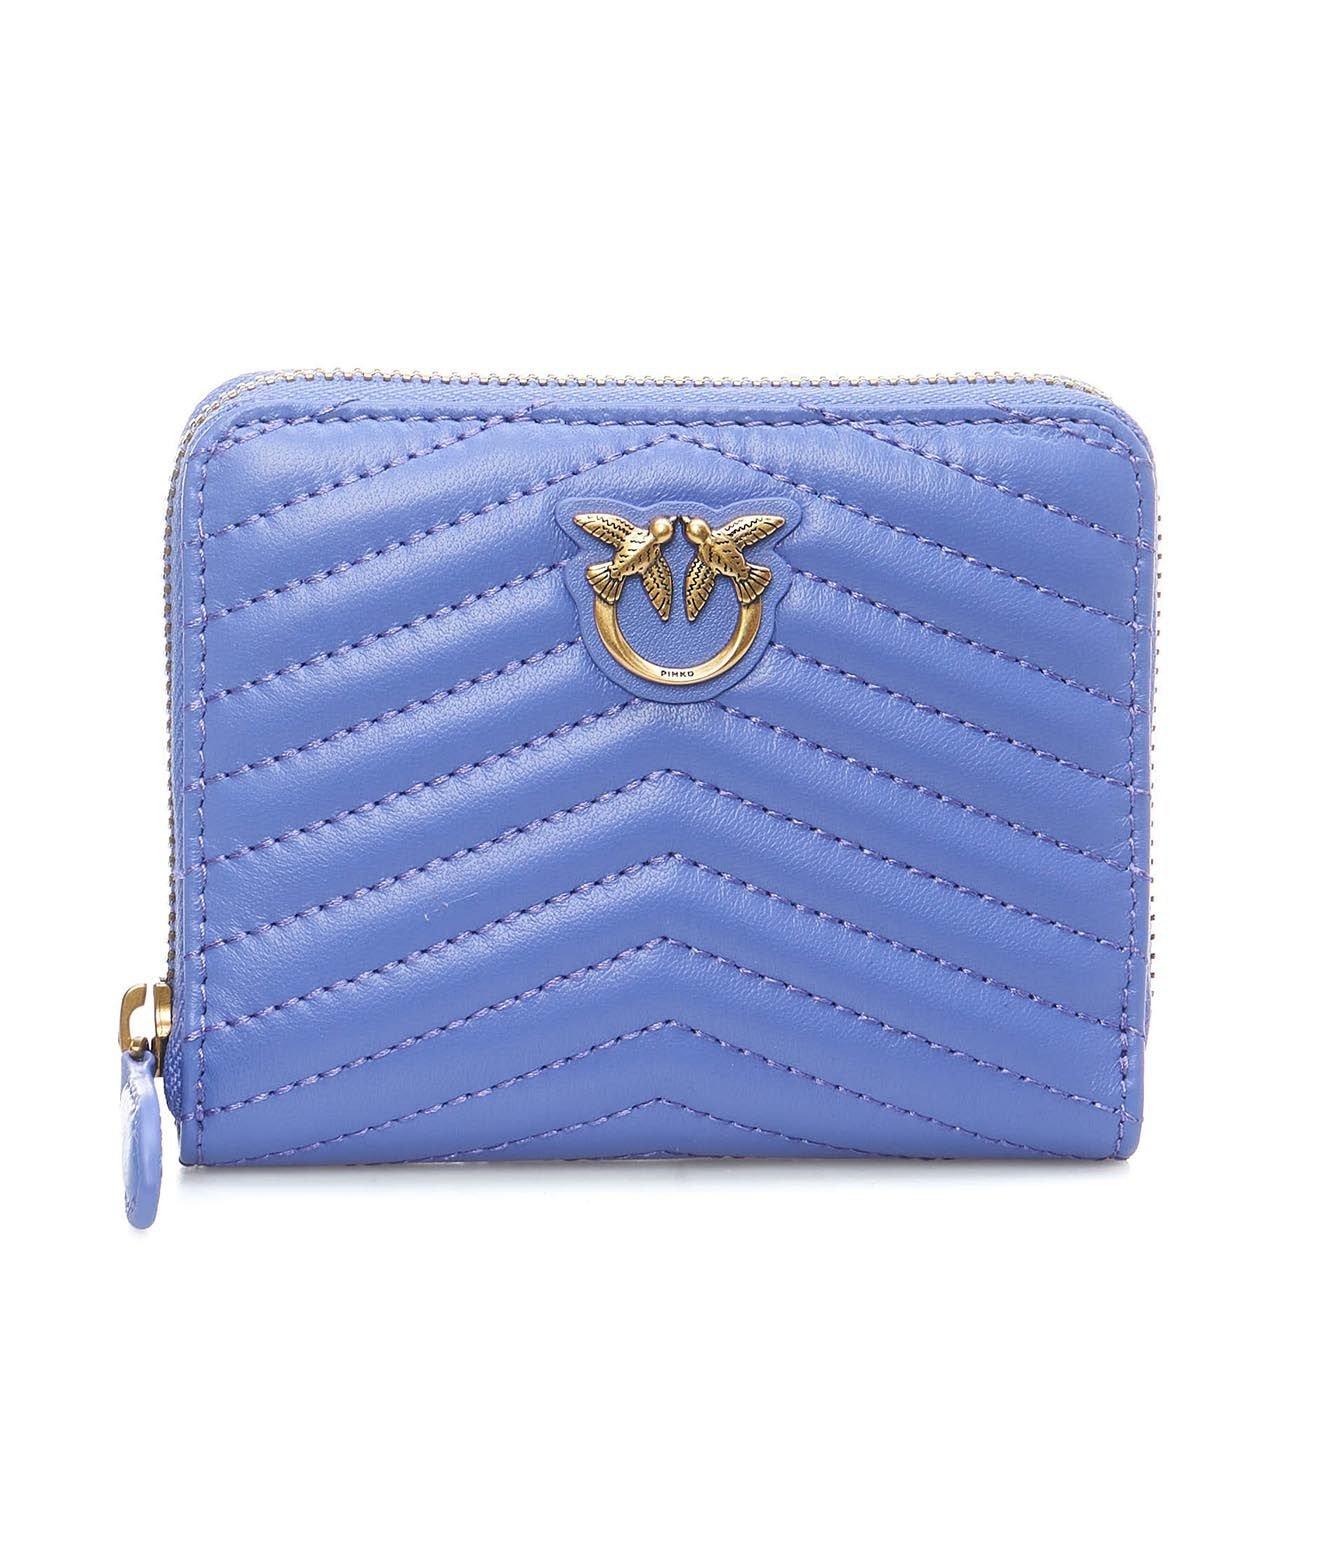 PINKO LOGO PLAQUE QUILTED ZIPPED WALLET